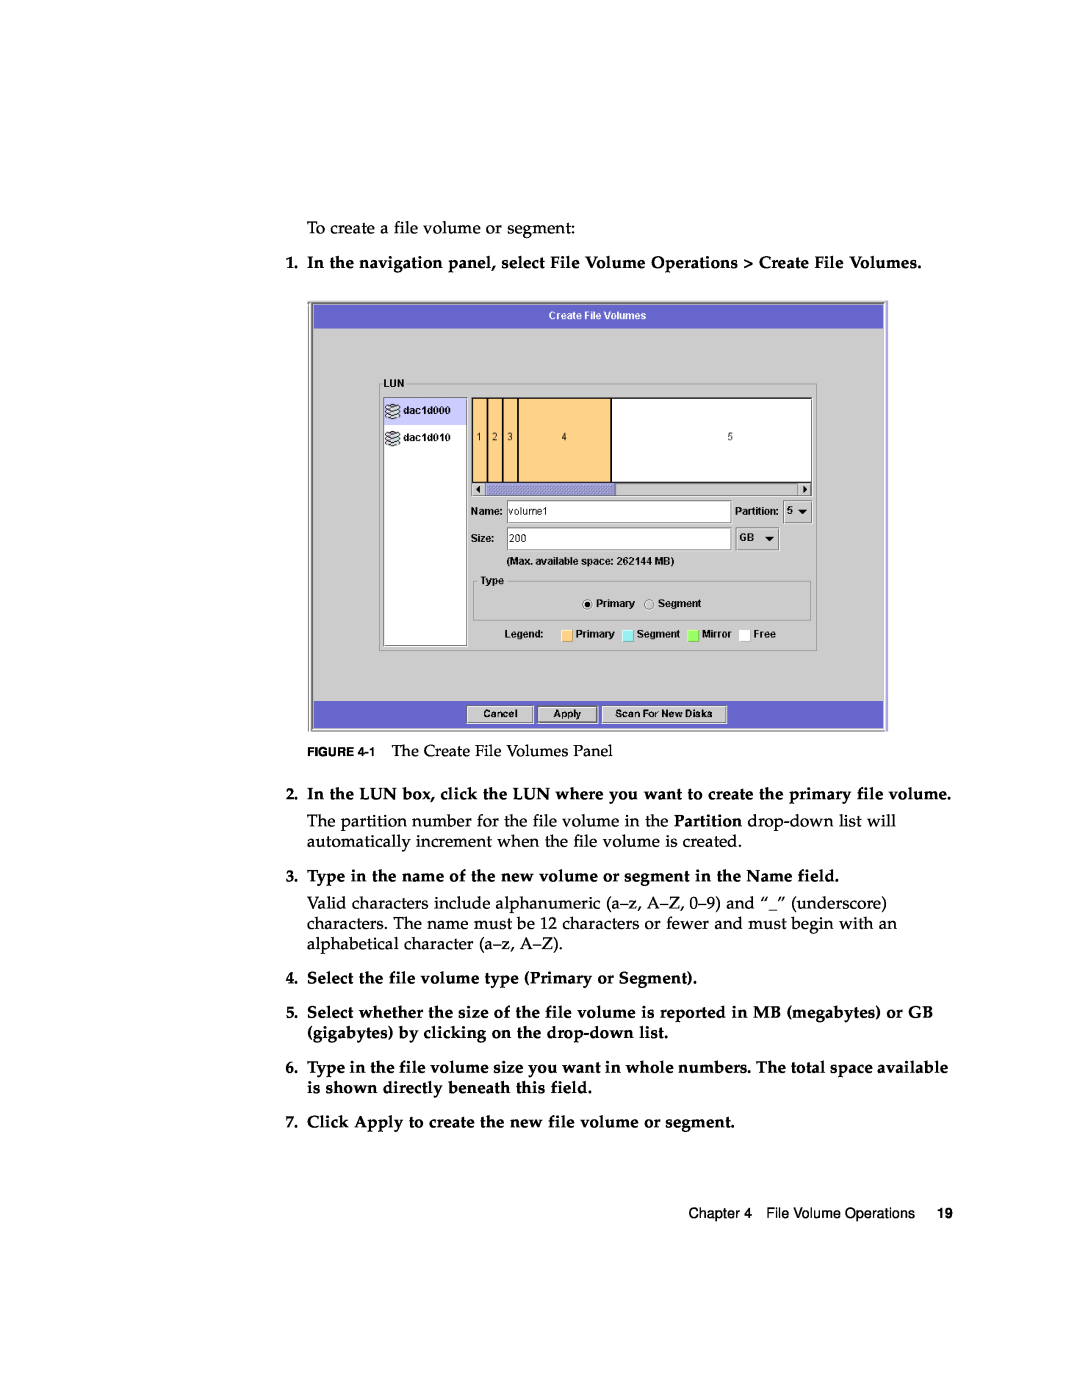 Sun Microsystems 5210 NAS manual Type in the name of the new volume or segment in the Name field 